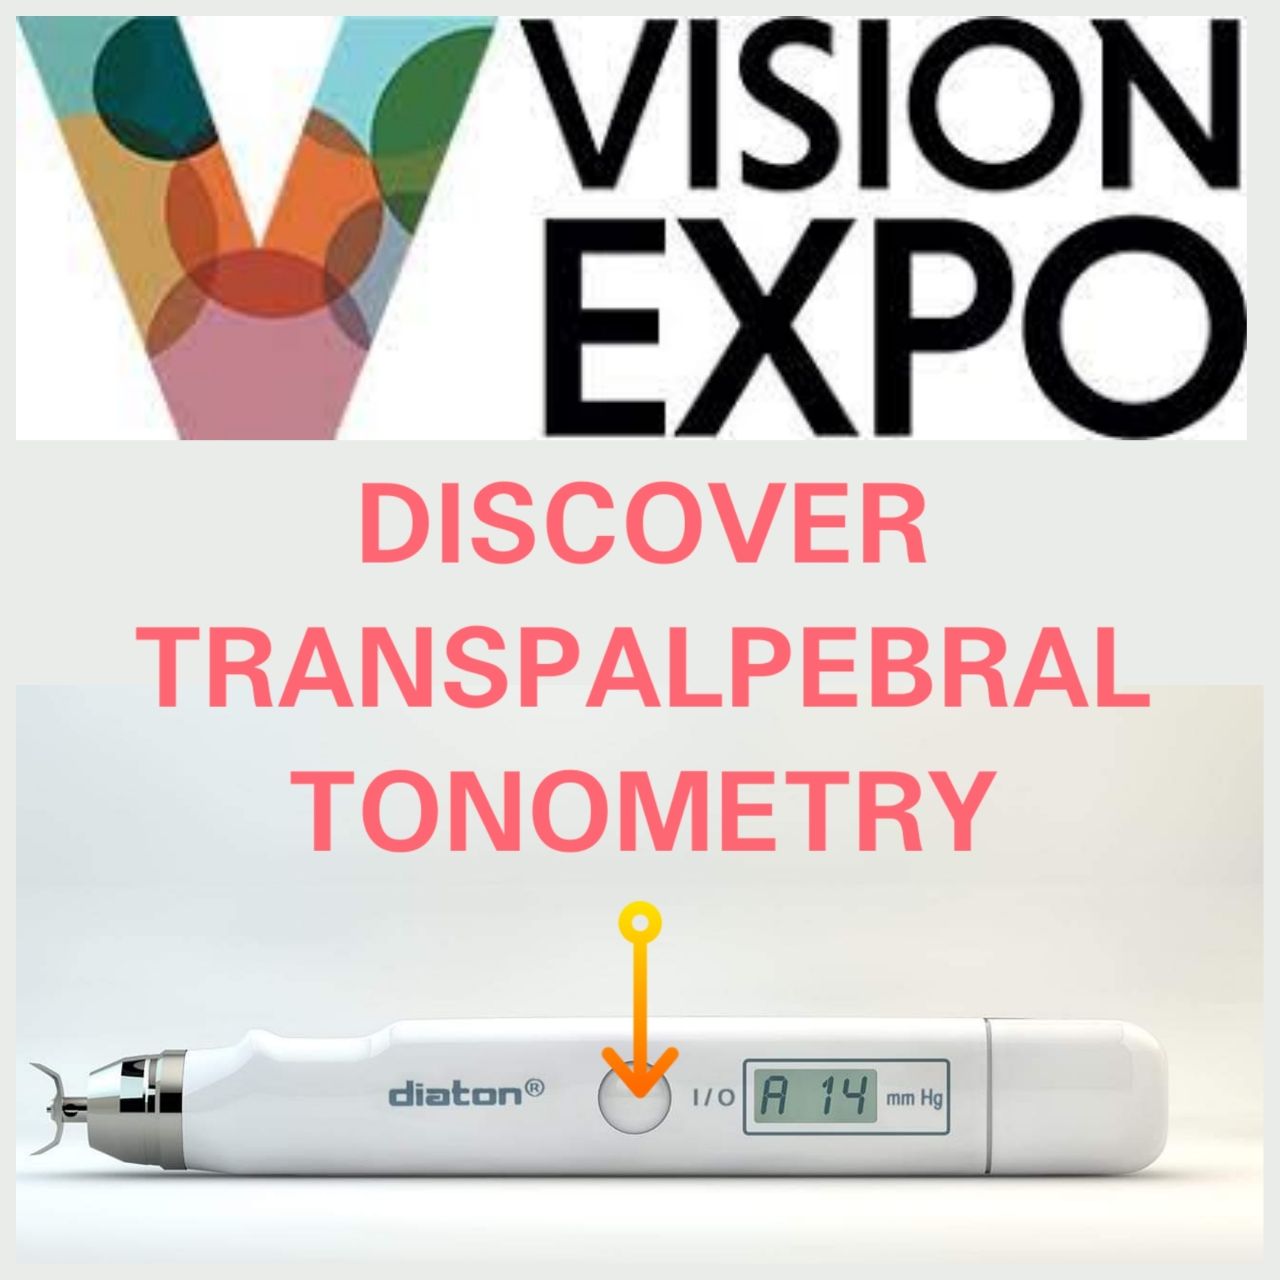 A REVOLUTIONARY WAY TO MEASURE INTRAOCULAR PRESSURE (IOP) FETURED BY DIATON TONOMETER AT VISION EXPO WEST